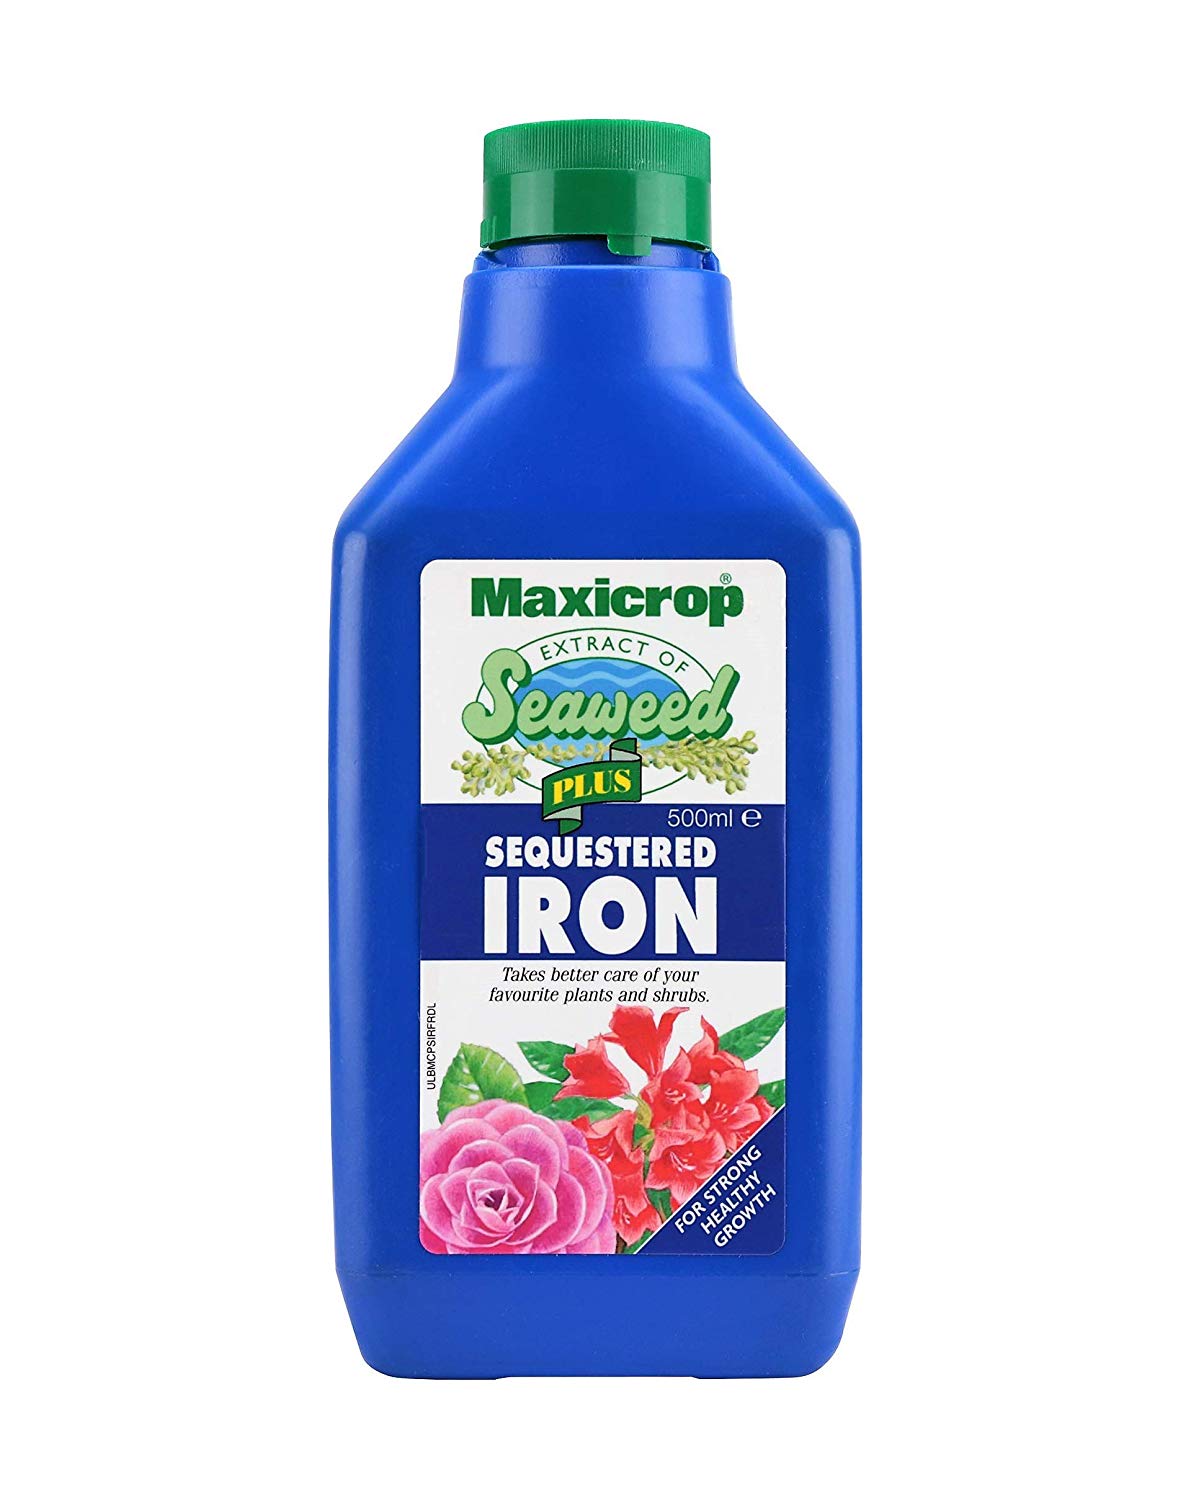 maxicrop extract of seaweed plus sequestered iron